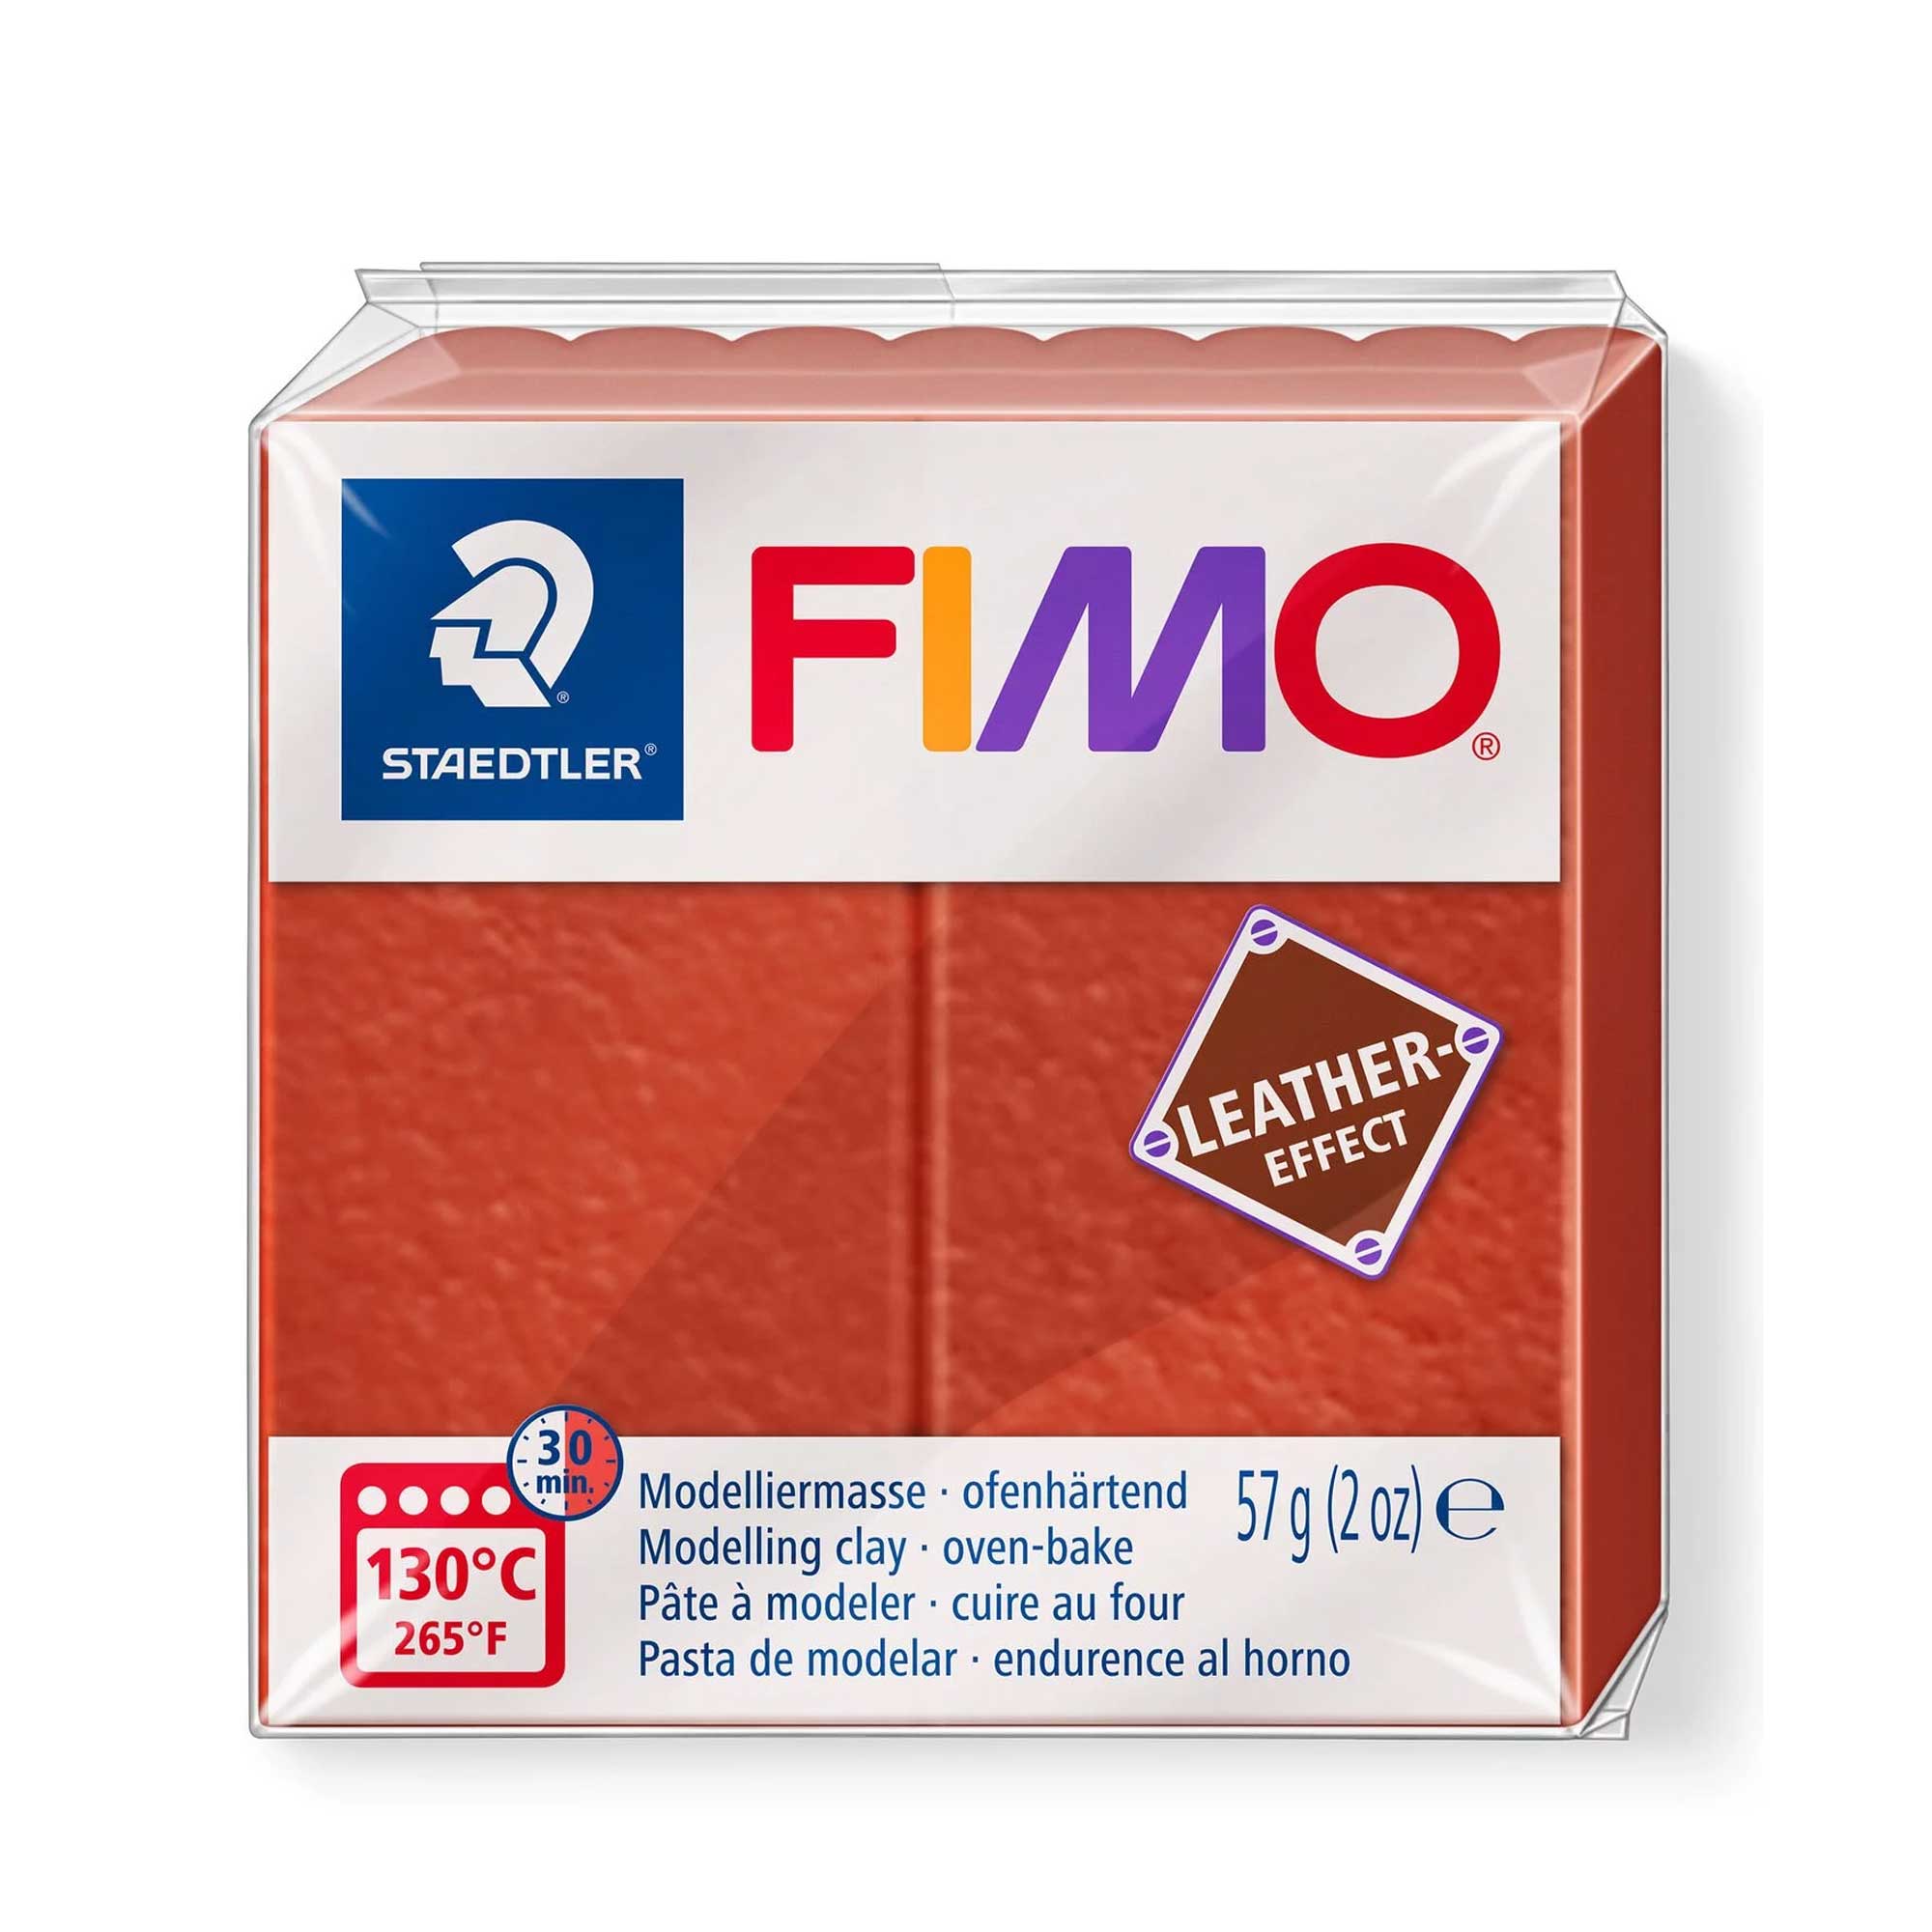 Staedtler FIMO LEATHER EFFECT Modelling Blocks - In Packaging